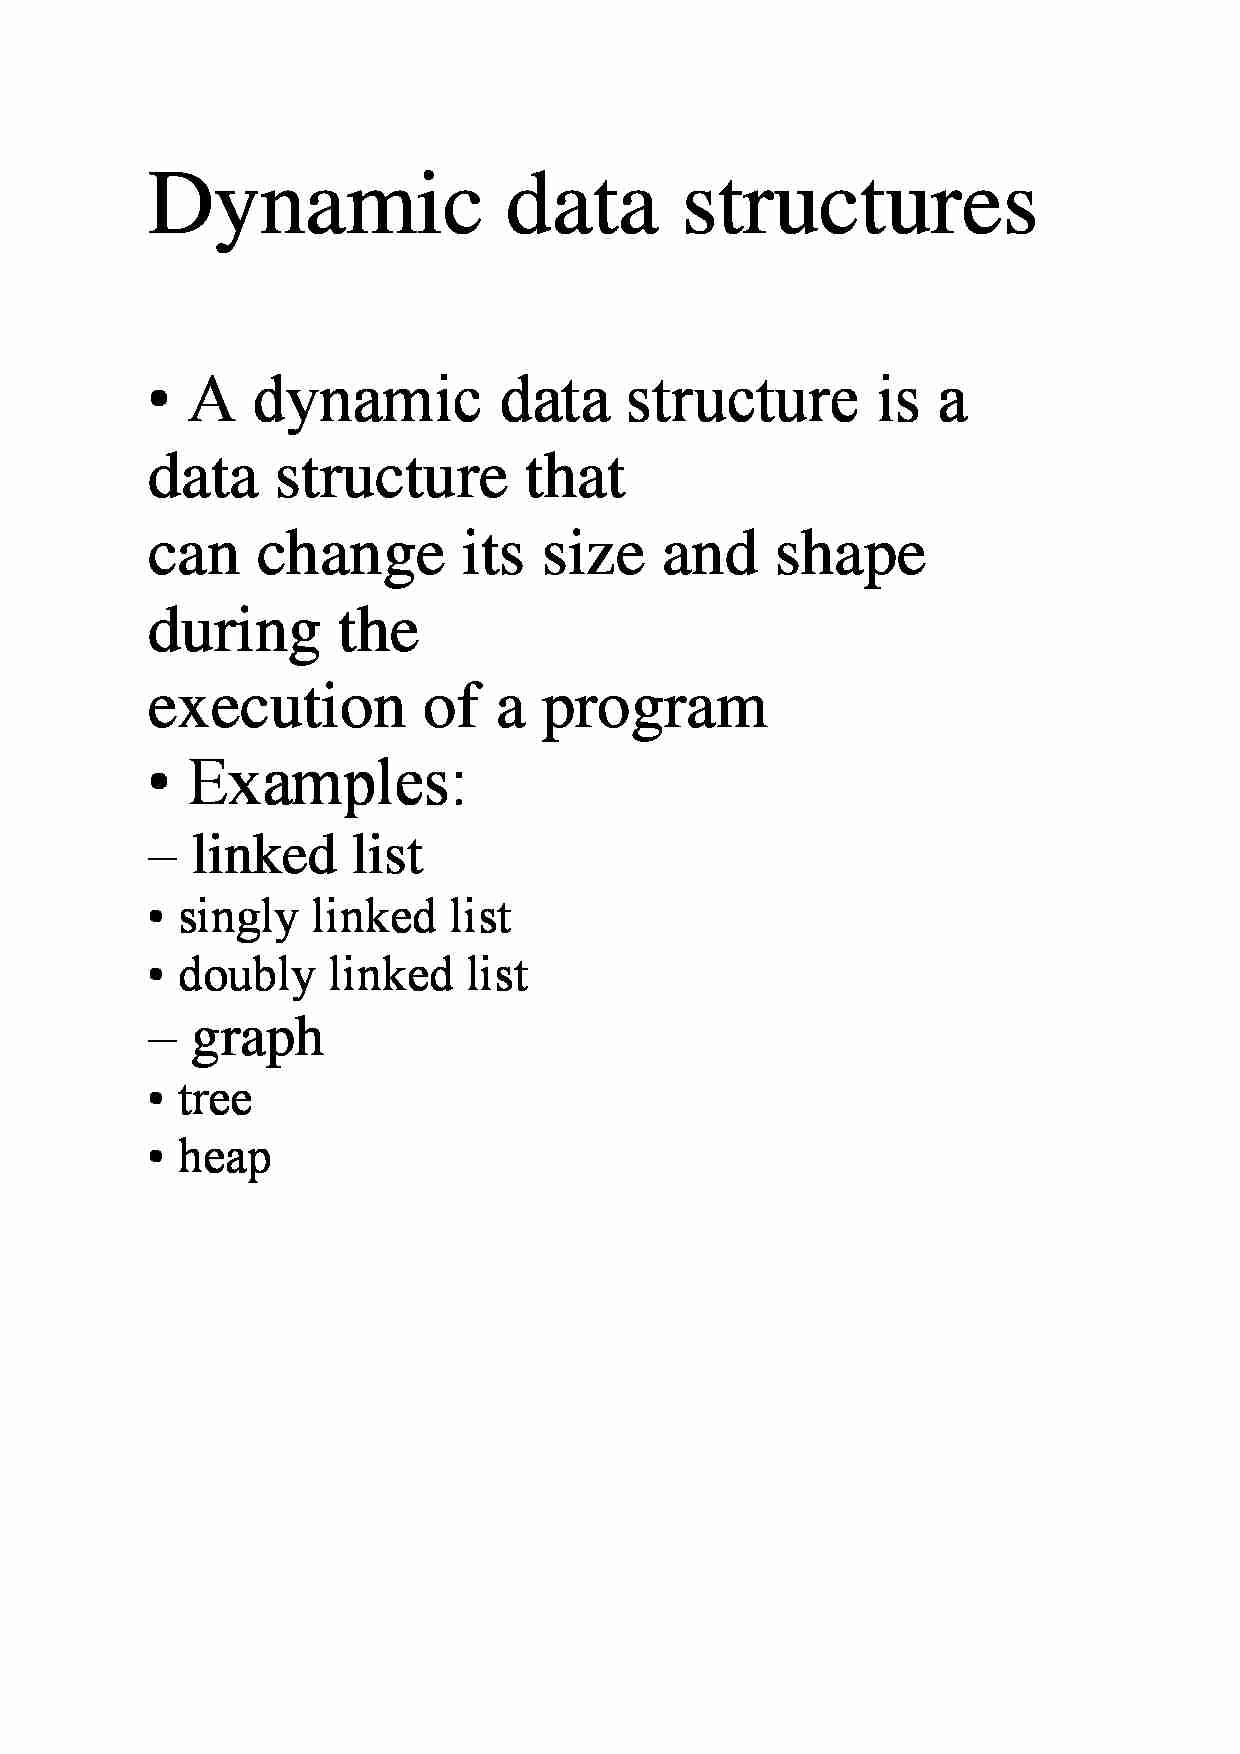 Dynamic data structures - strona 1